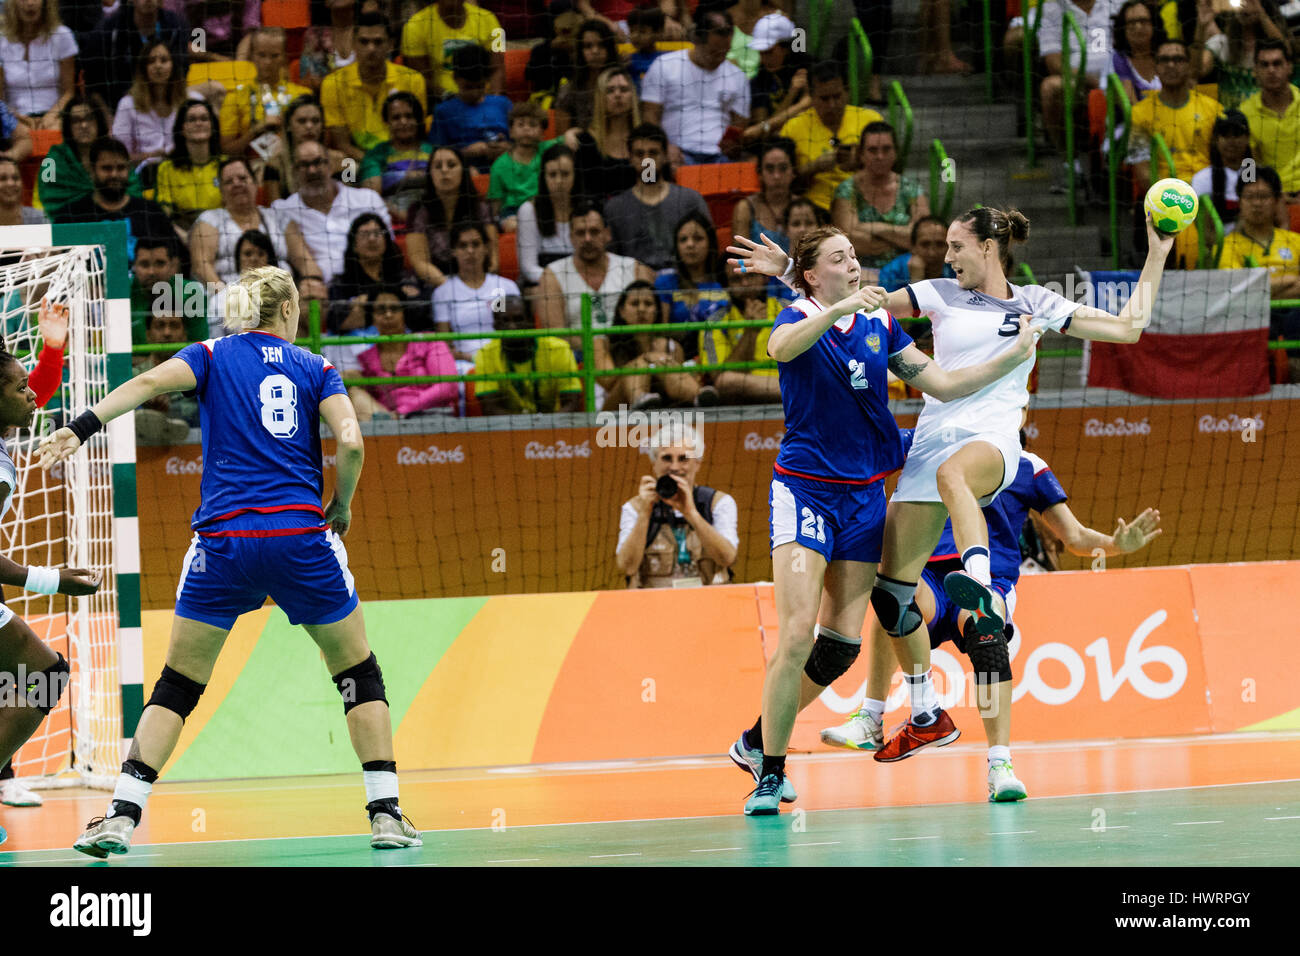 Rio de Janeiro, Brazil. 20 August 2016 Camille Ayglon-Saurina (FRA) #5 defended by Victoria Zhilinskayte (RUS) #21 in the women's handball gold medal  Stock Photo